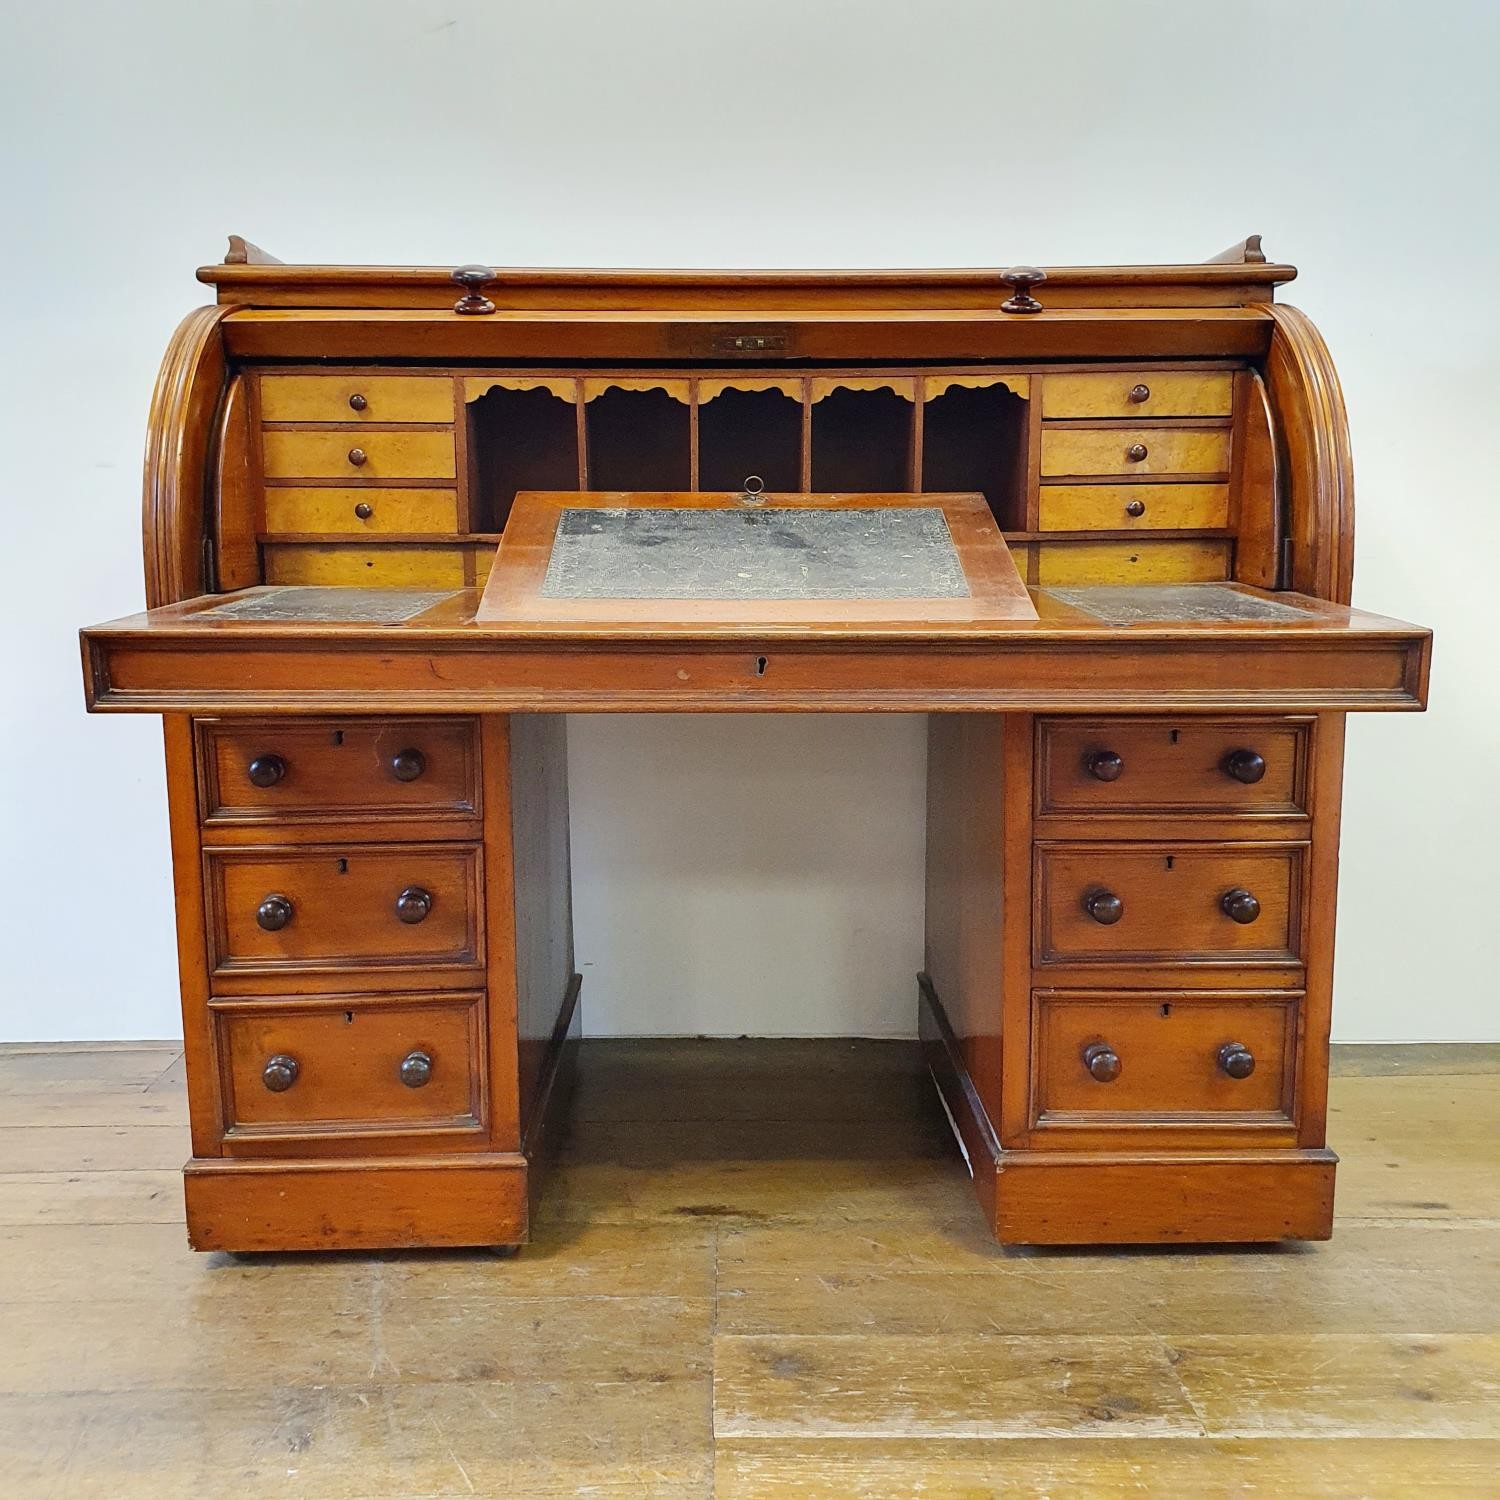 A 19th century mahogany cylinder desk, with a fitted interior, on a base with six drawers, 122 cm - Image 2 of 6